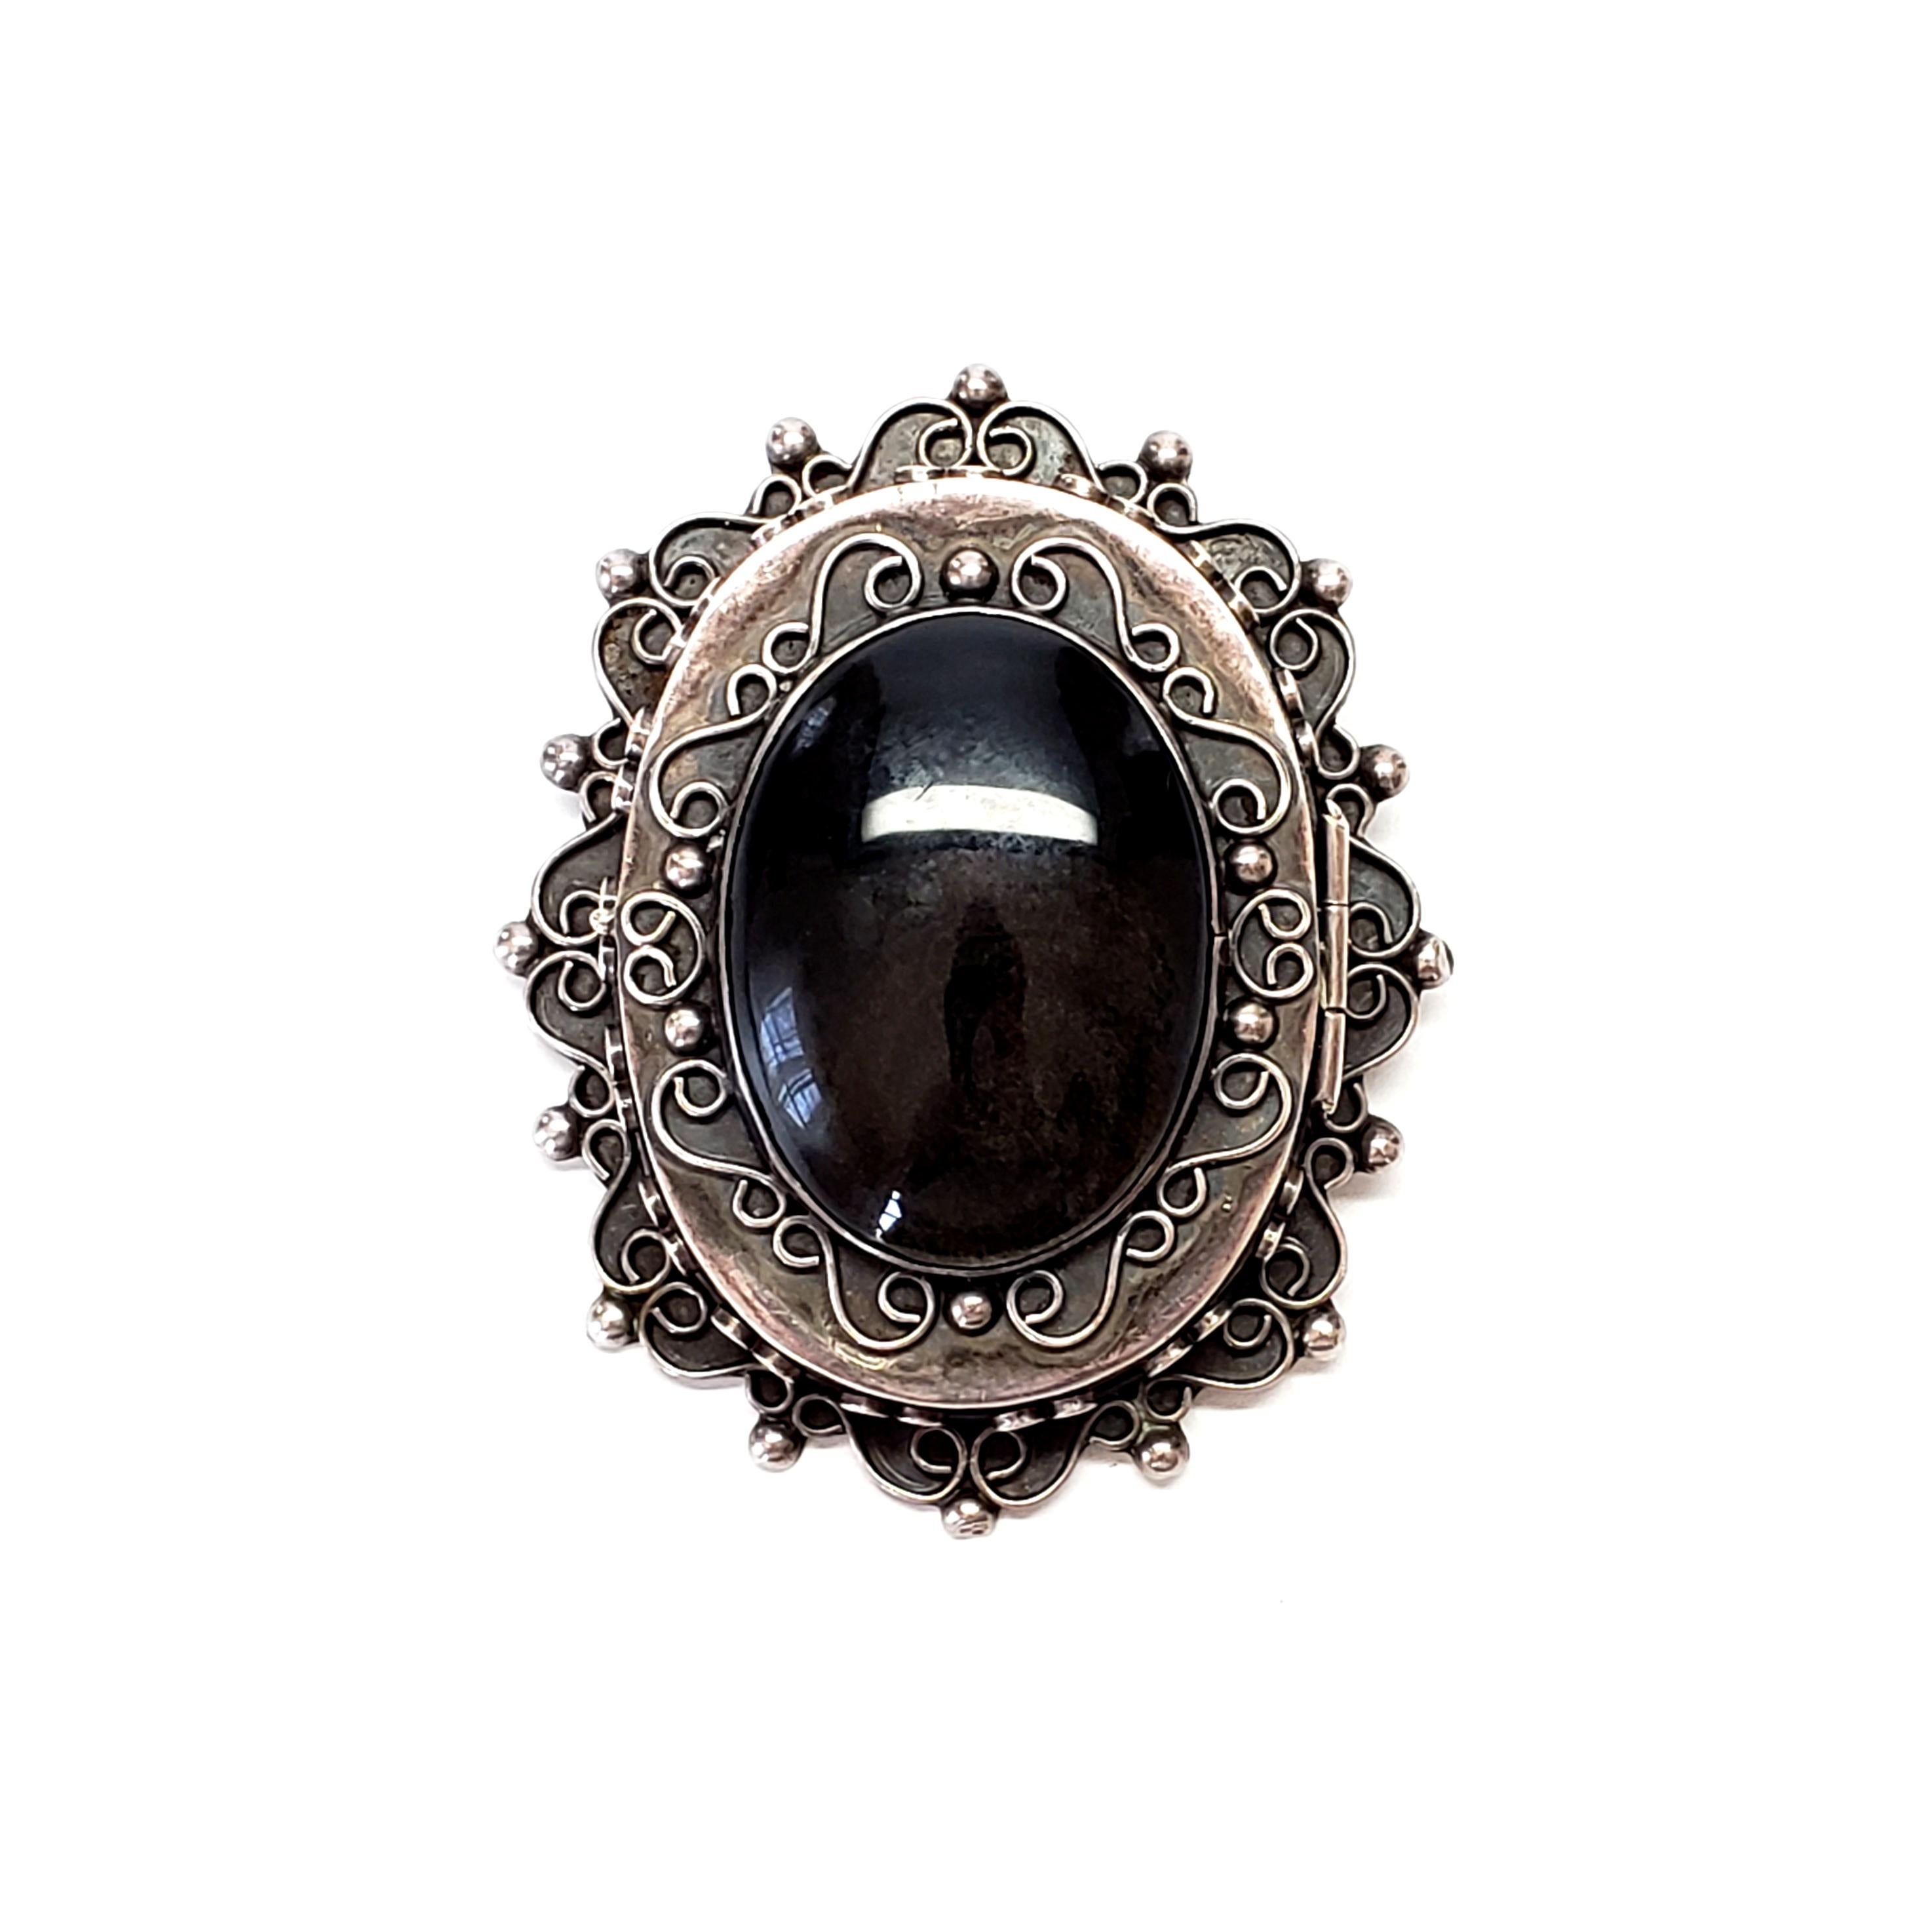 Taxco Mexico sterling silver and obsidian large locket by artisan Aartenca.

Large and ornate oval locket that can be worn as a pendant or a pin. Stone has beautiful depth of color.

Measures approx 2 3/4